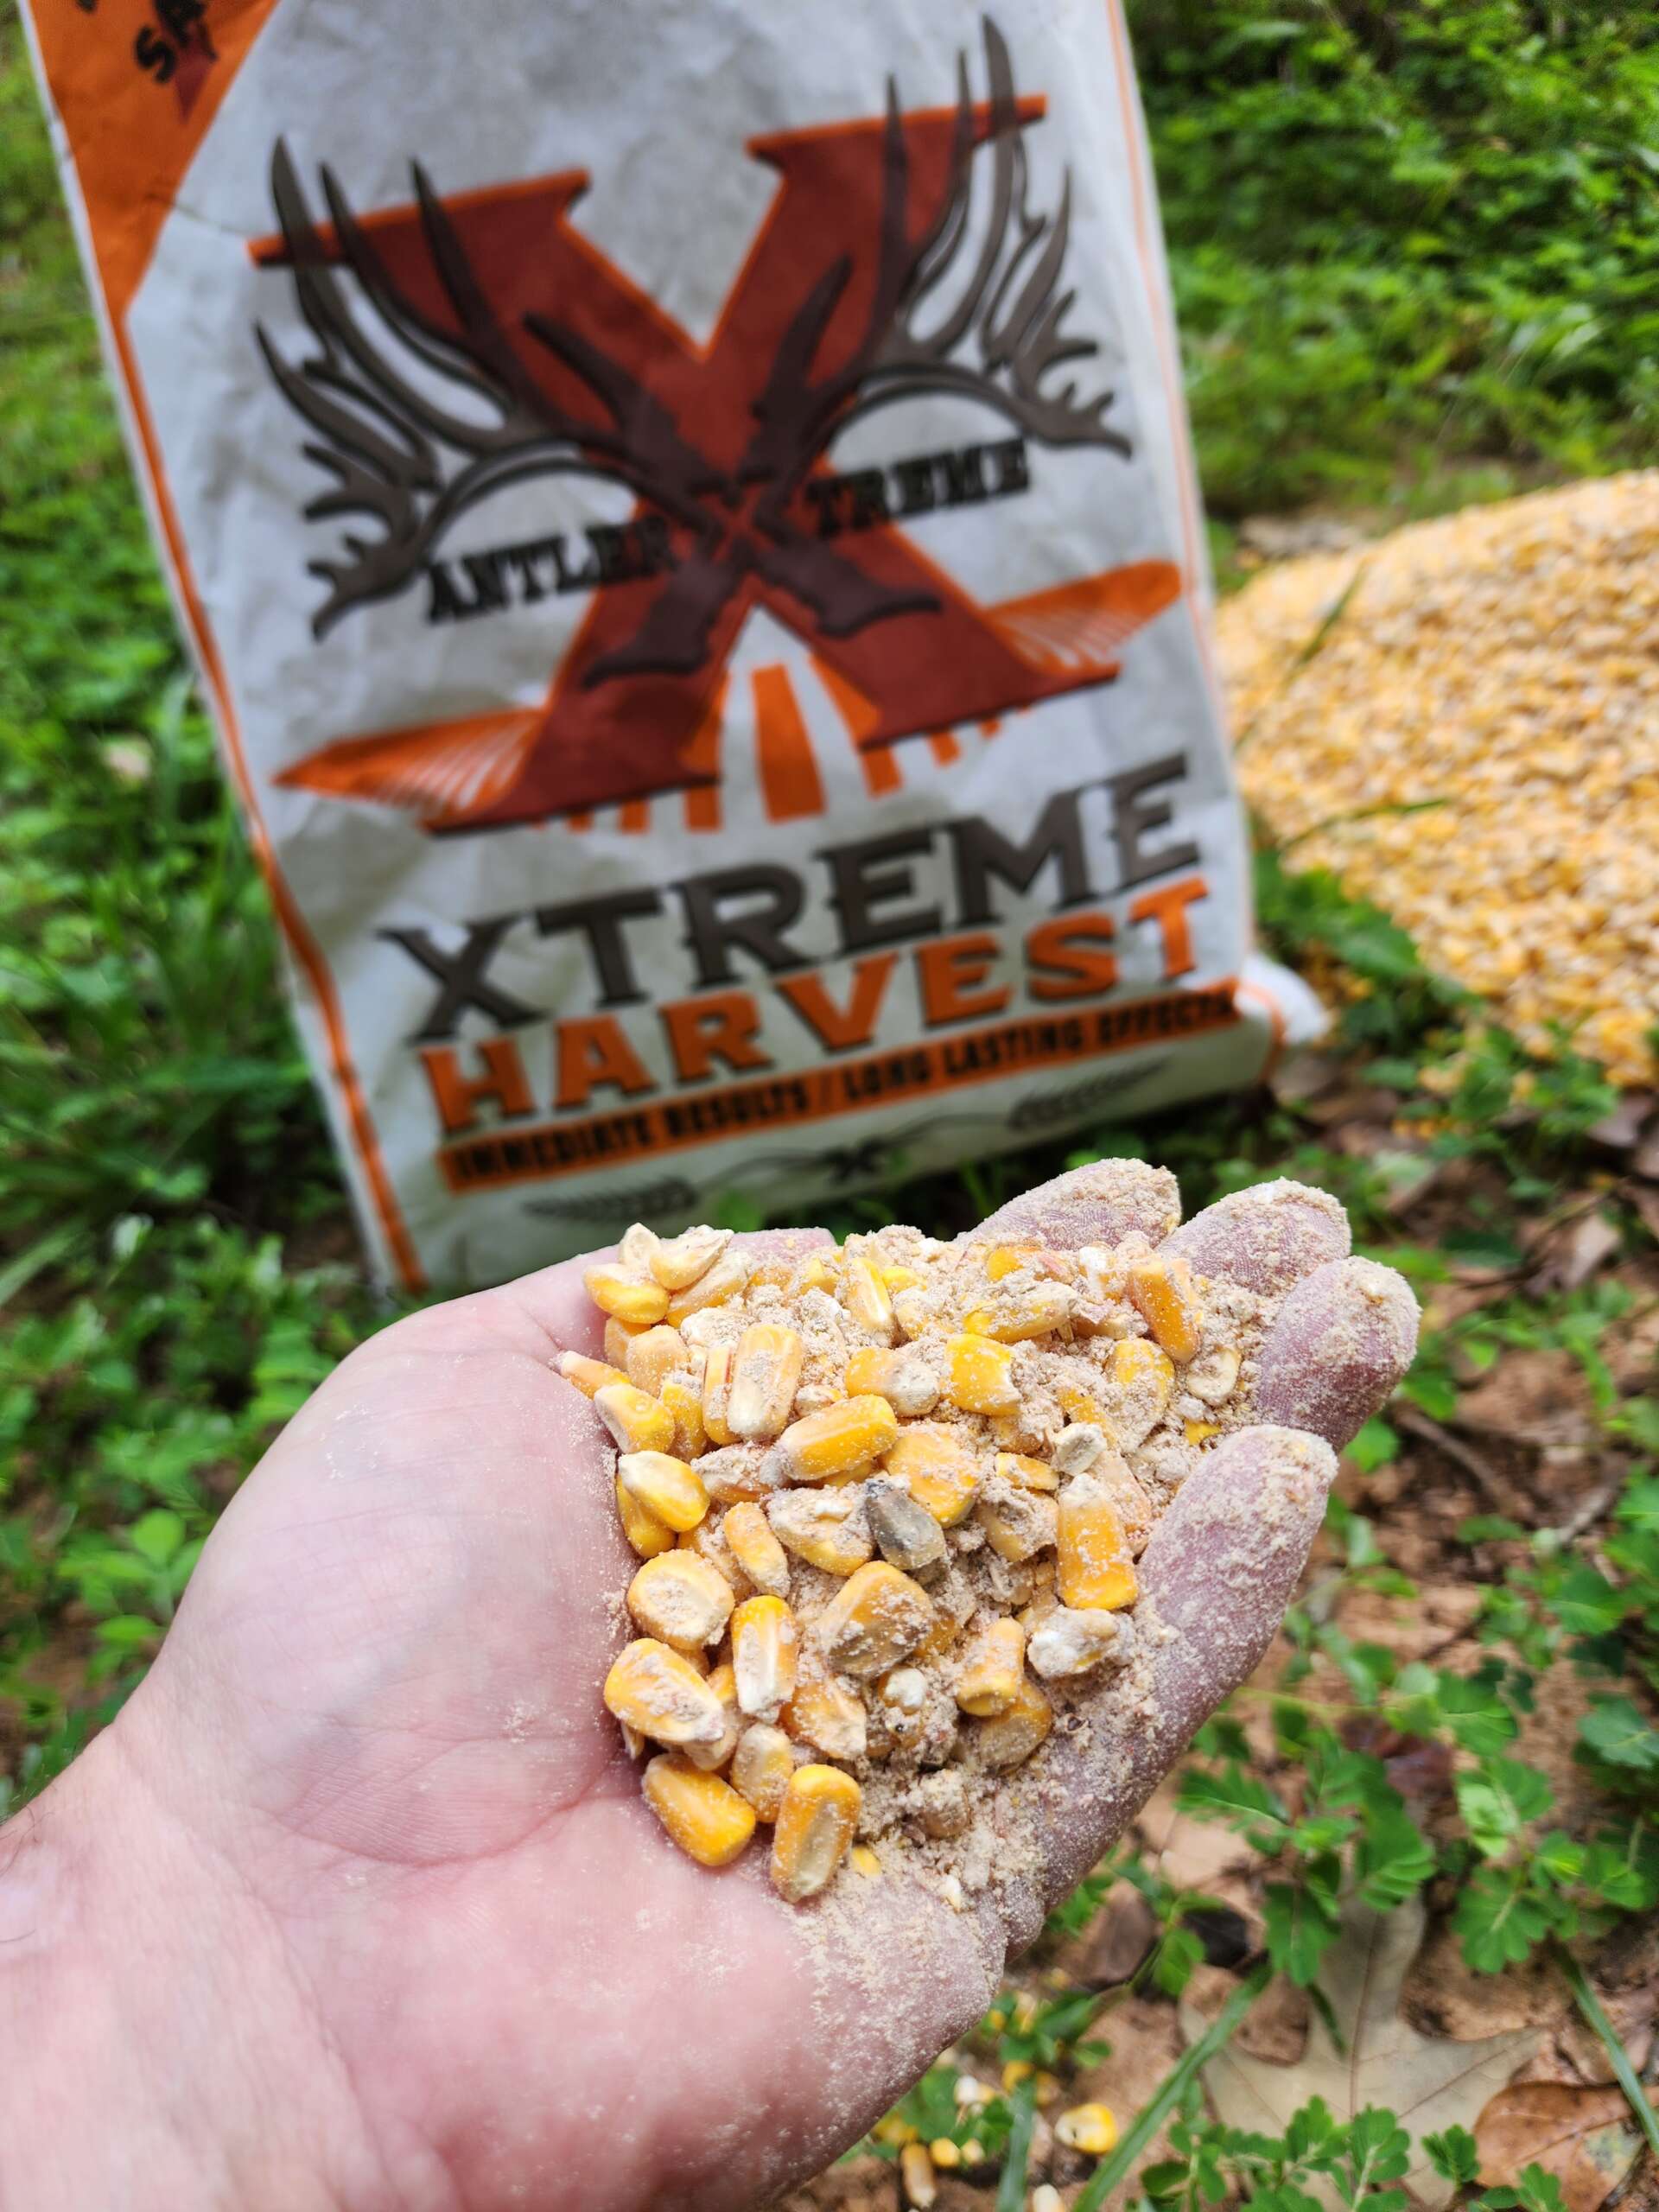 AntlerXtreme’s Xtreme Harvest: A Game Changer in Deer Attraction